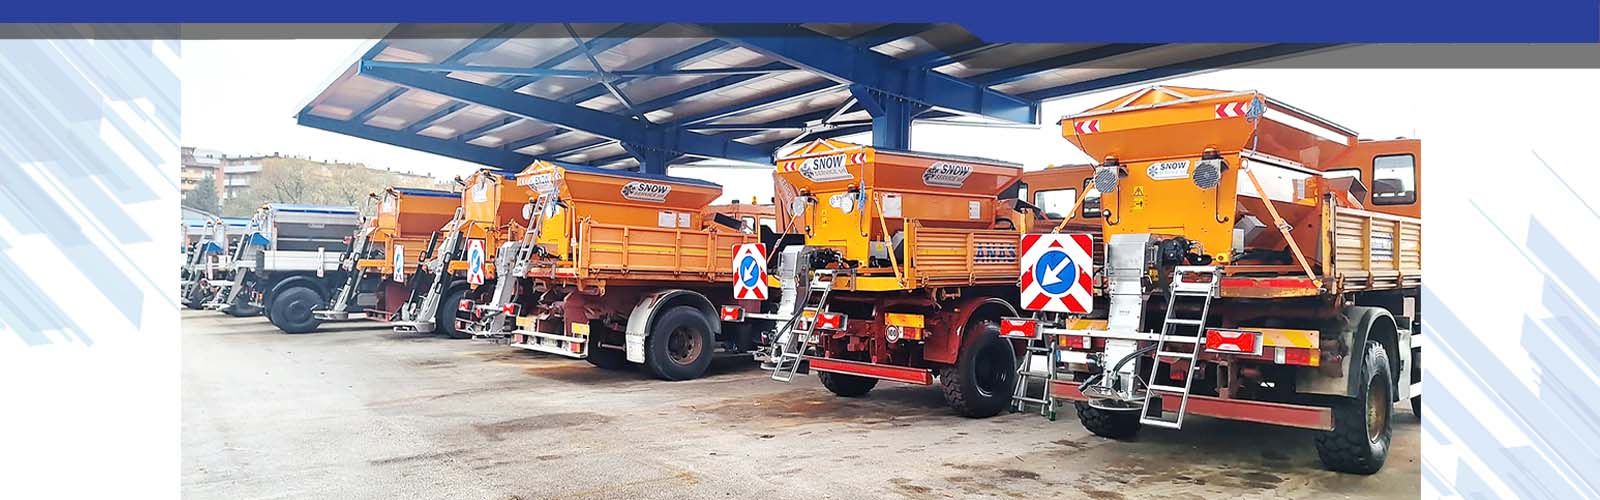 Snow service machines for winter roads and salt spreaders 01